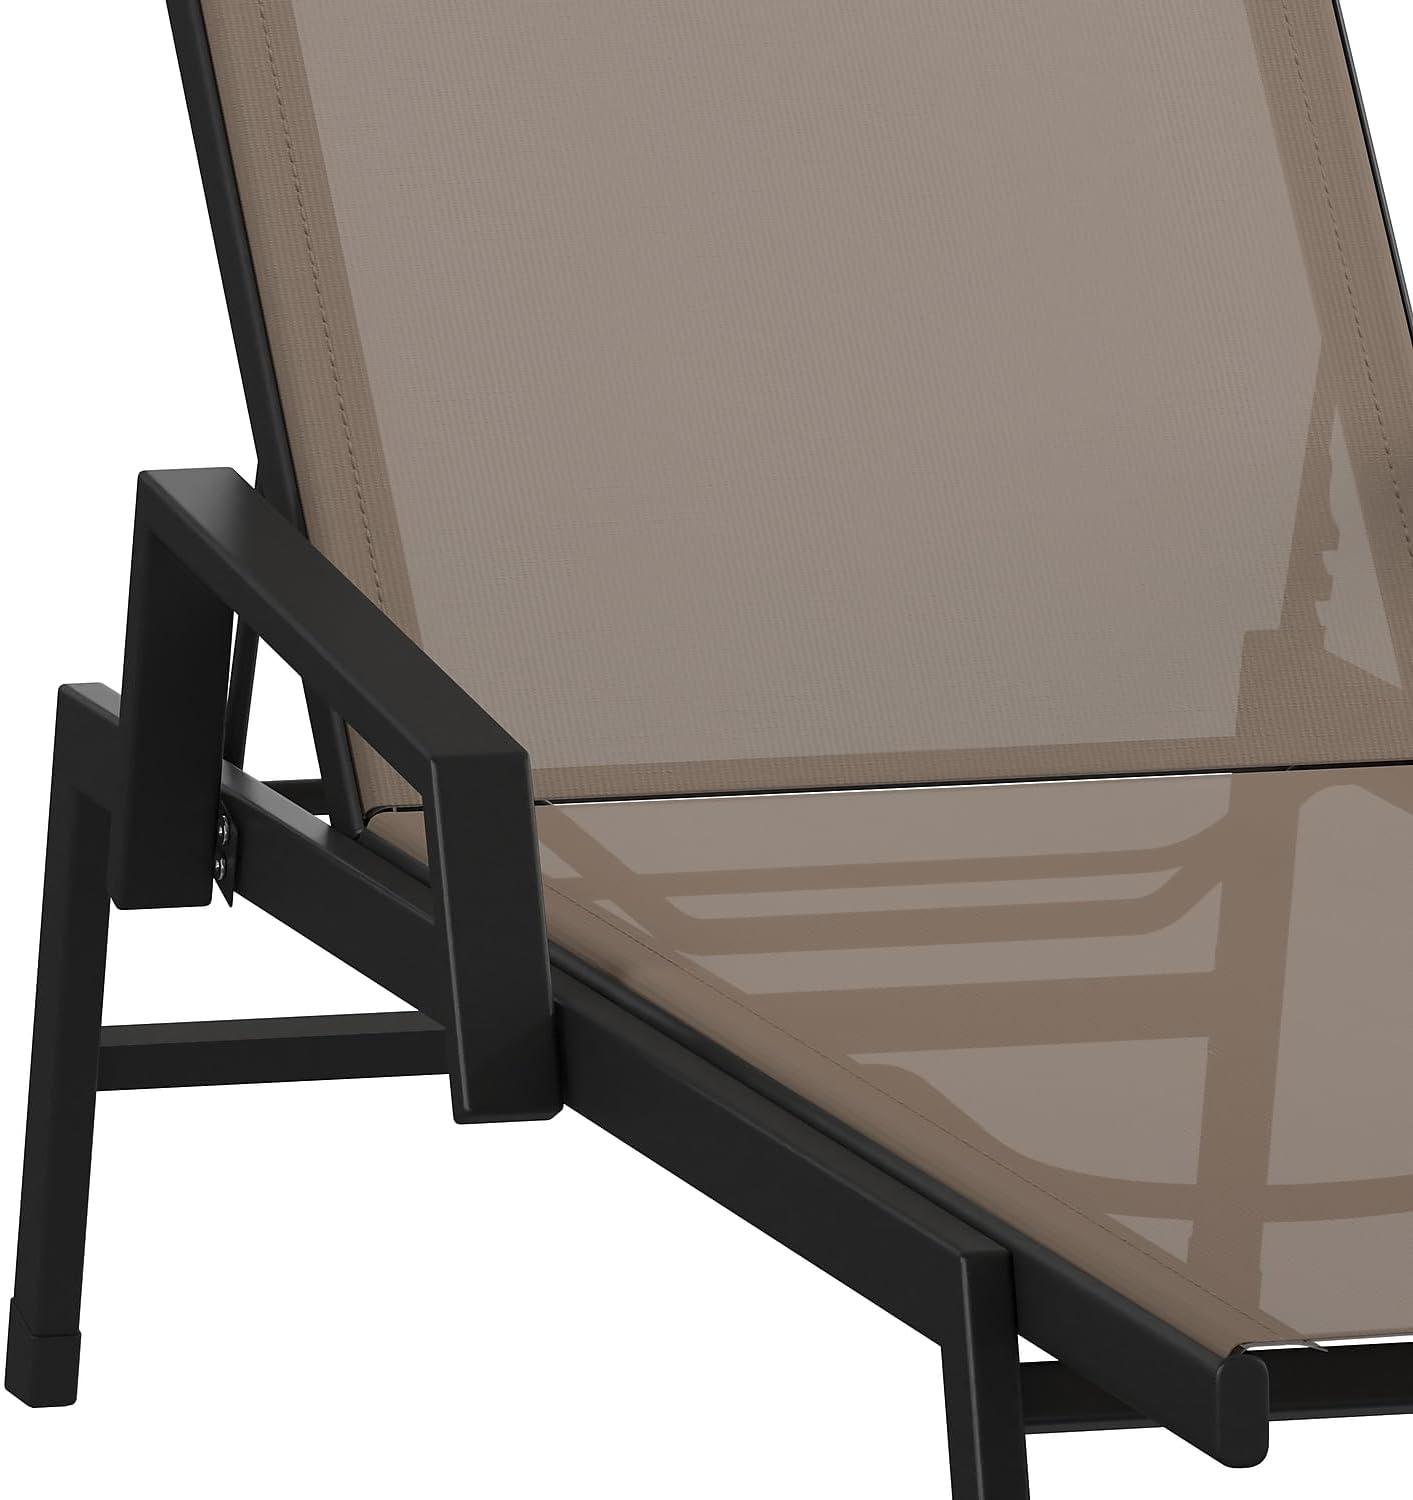 Brazos 62.5" Adjustable Outdoor Lounger in Black/Brown with Arms